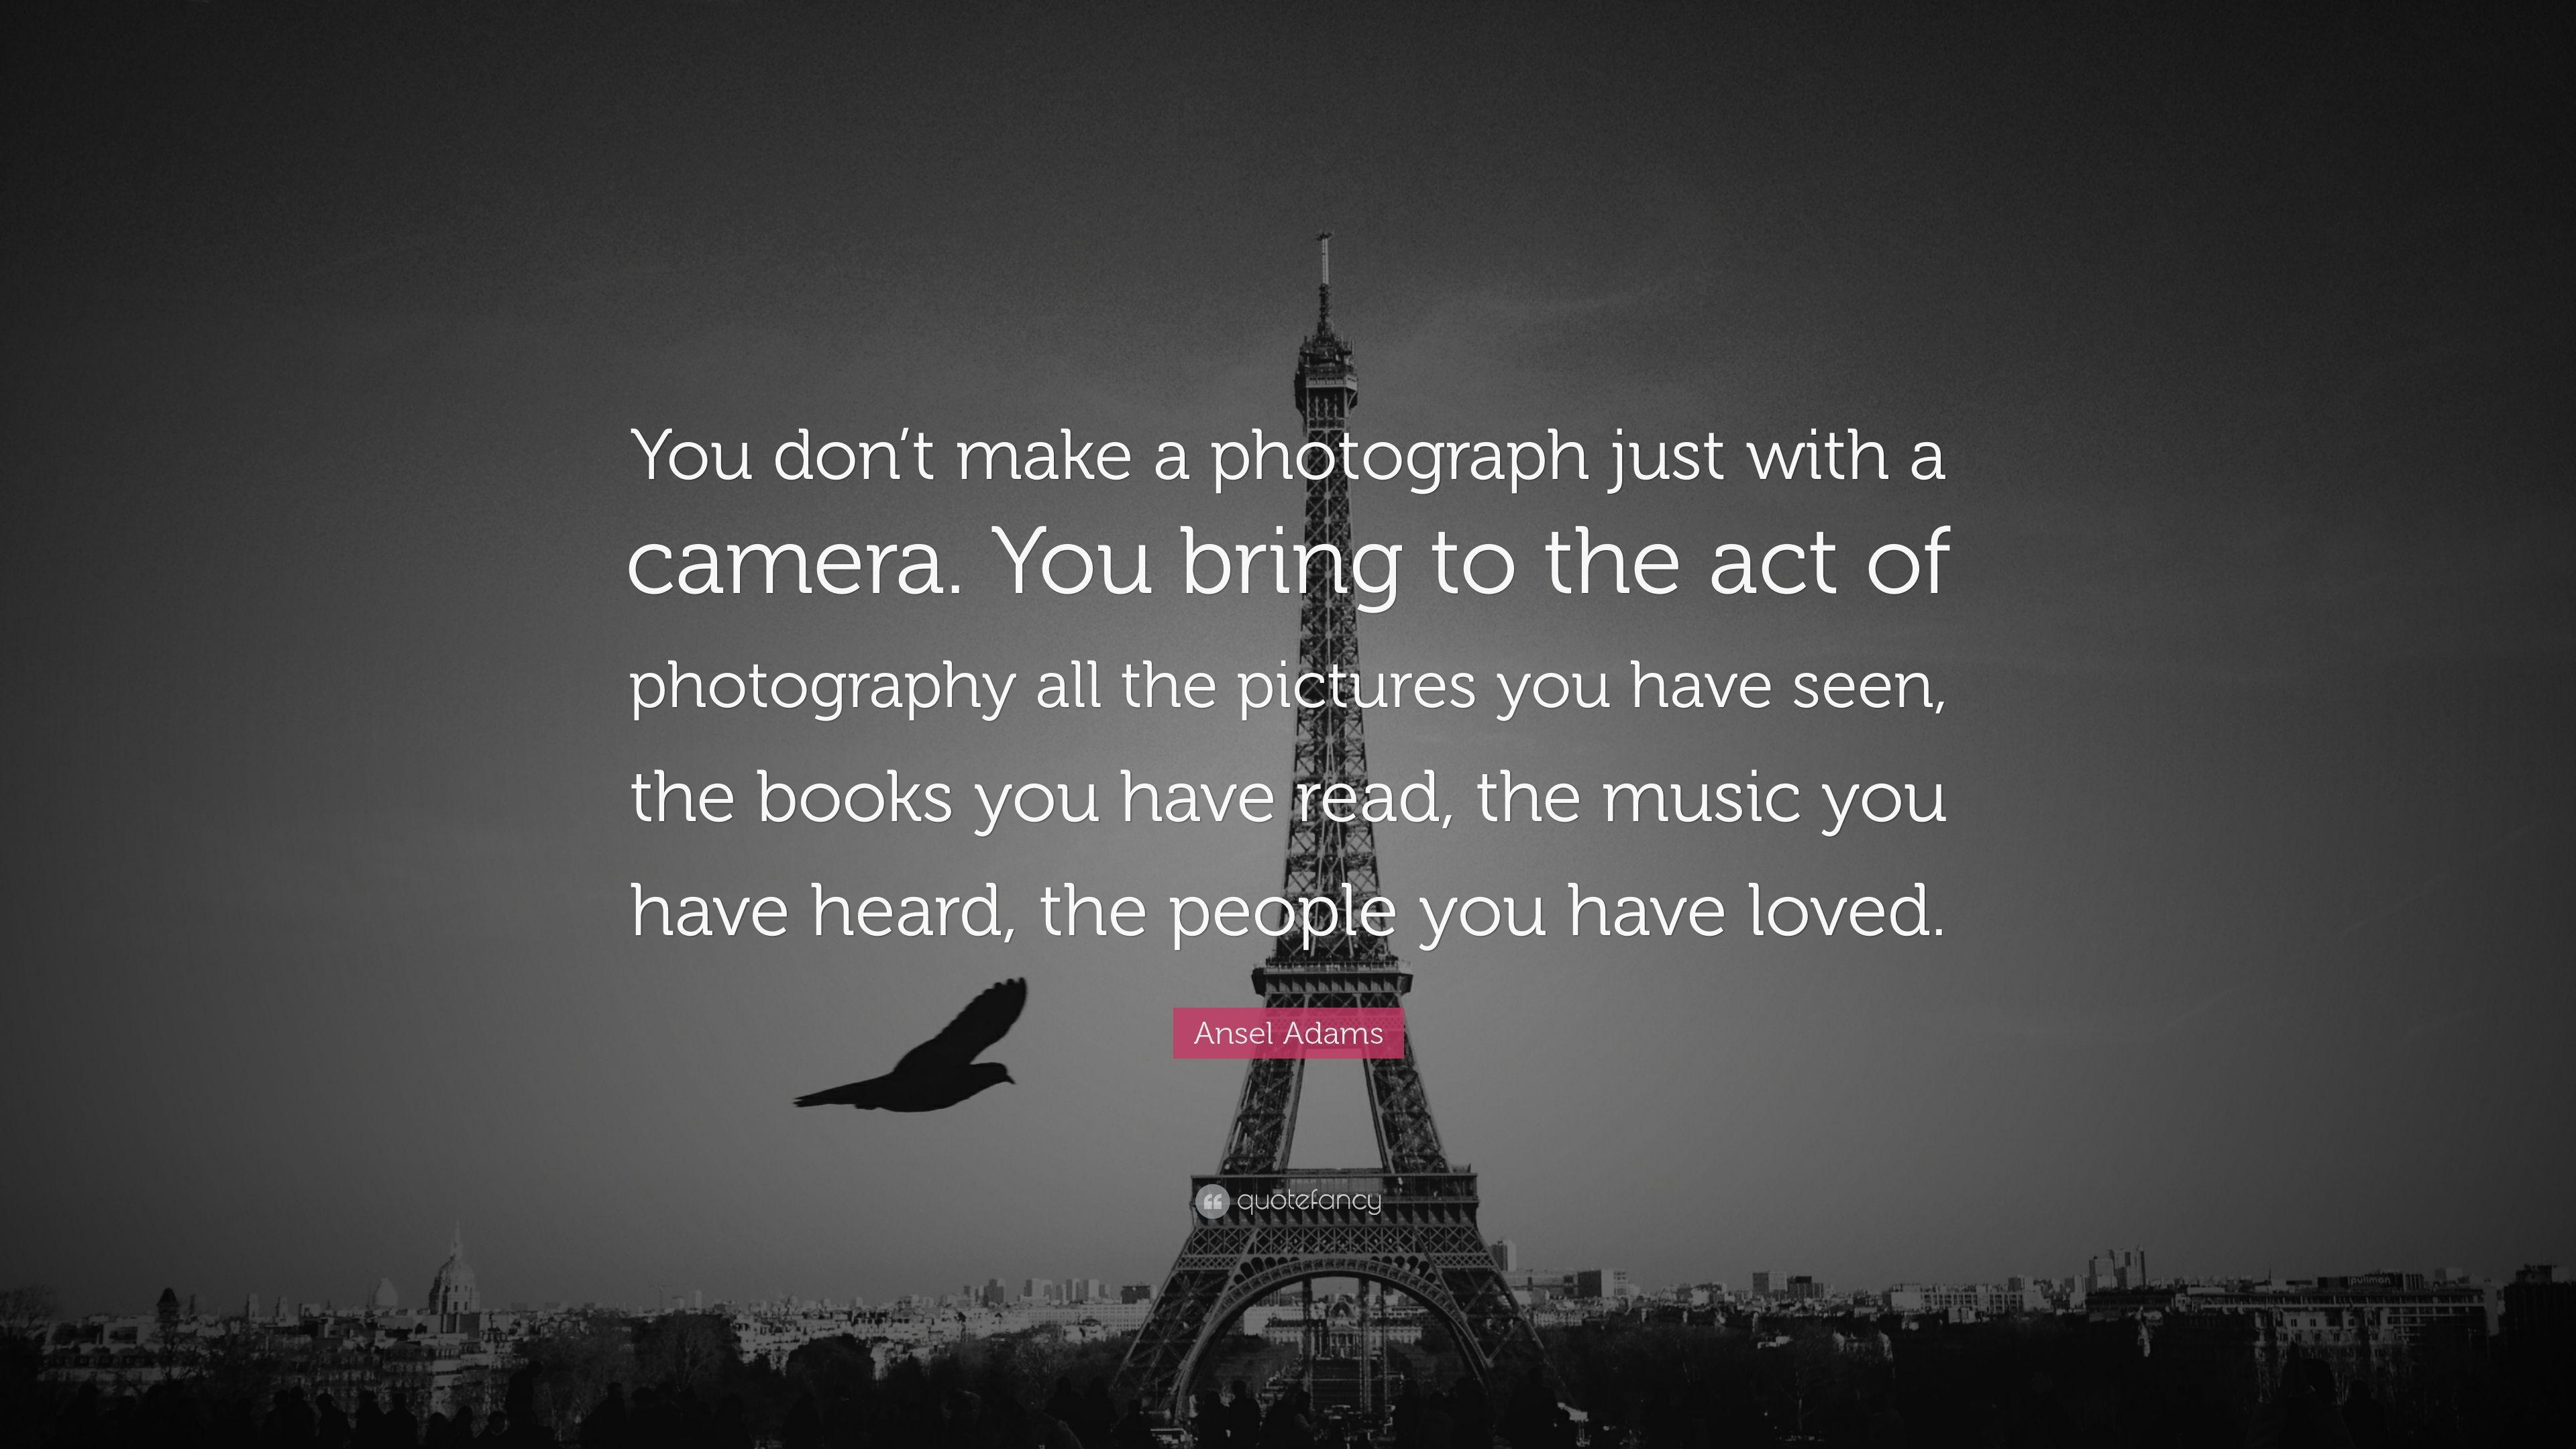 Ansel Adams Quote: “You don't make a photograph just with a